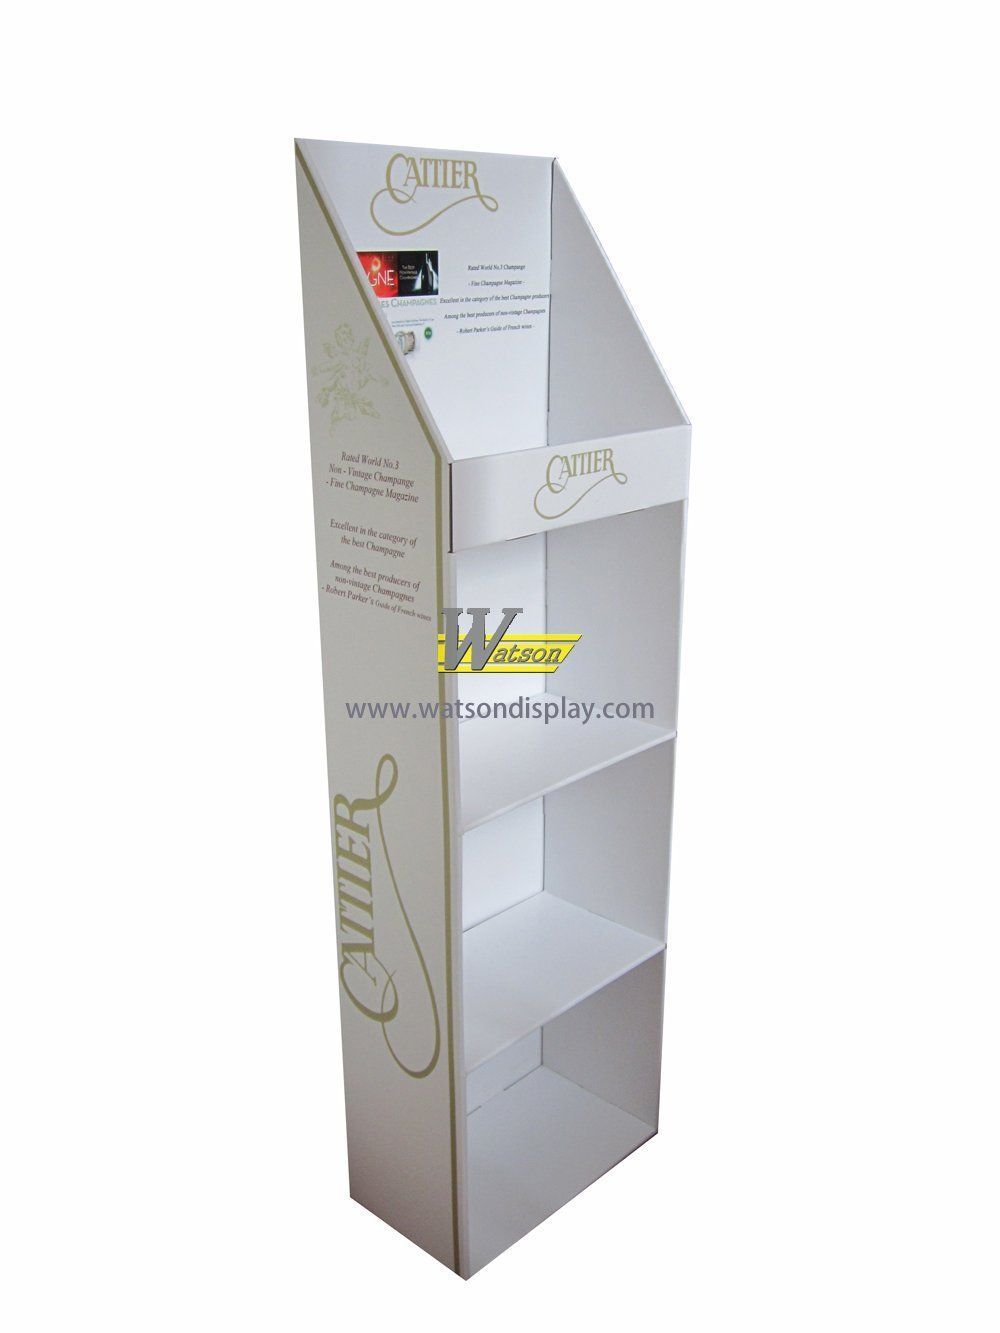 Hot sales handmade cardboard high quality floor display stand for champagne 